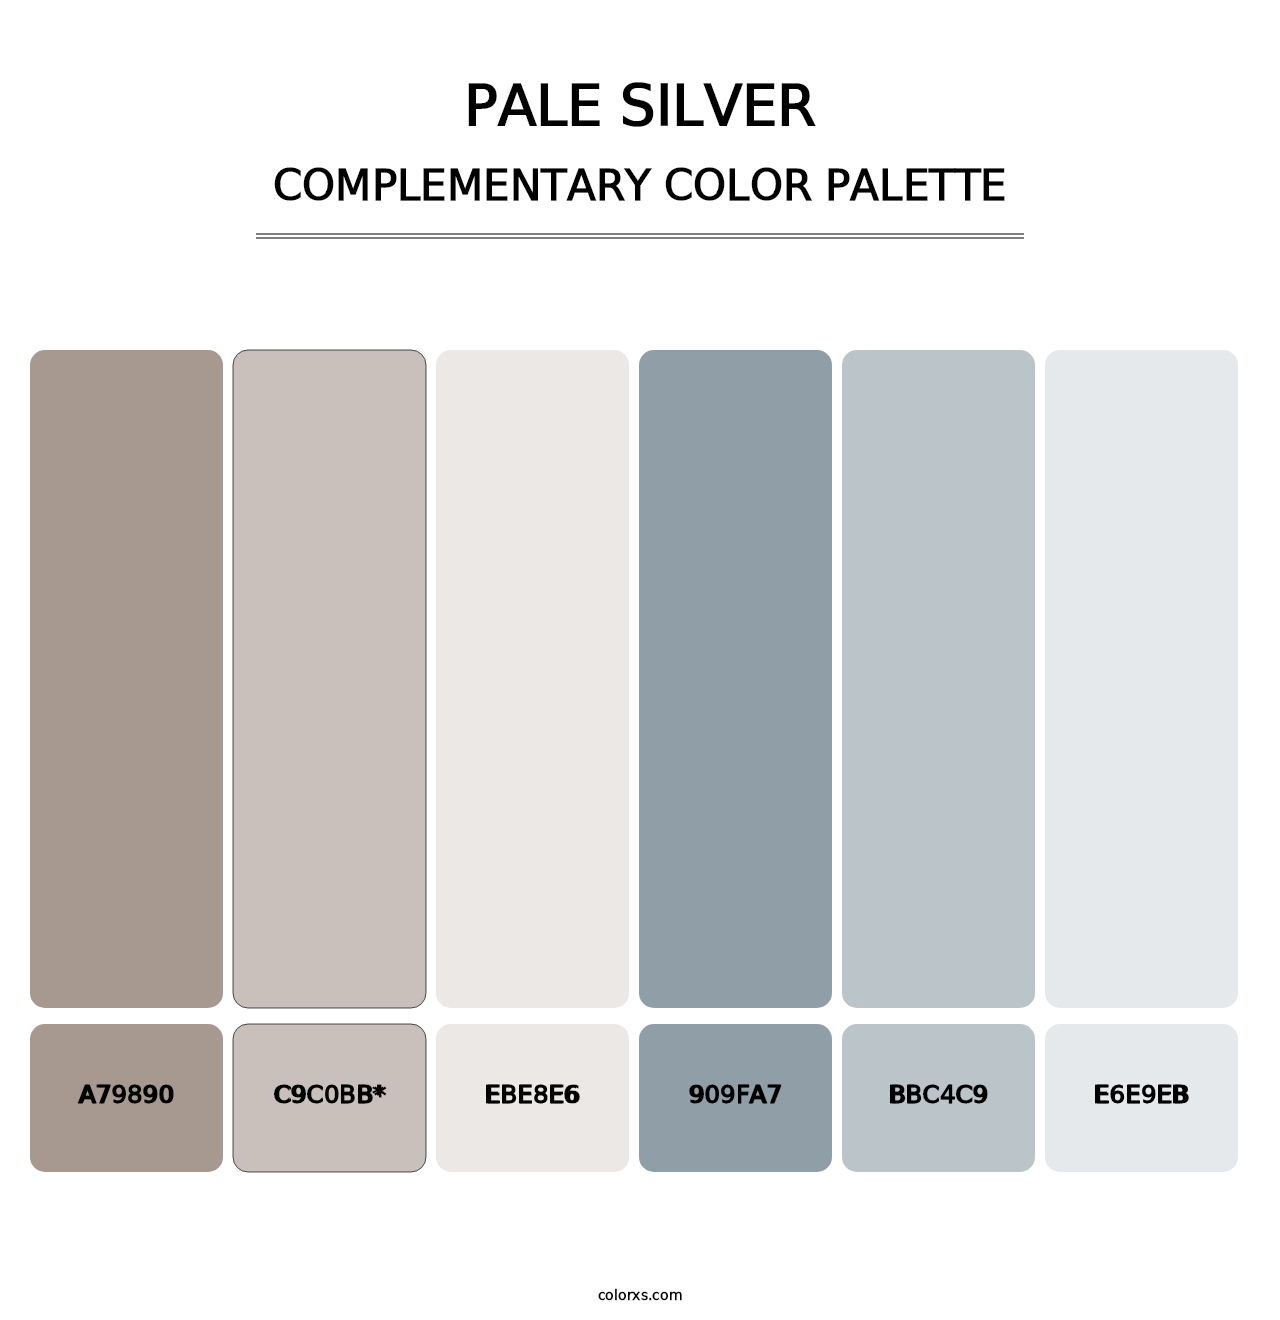 Pale Silver - Complementary Color Palette